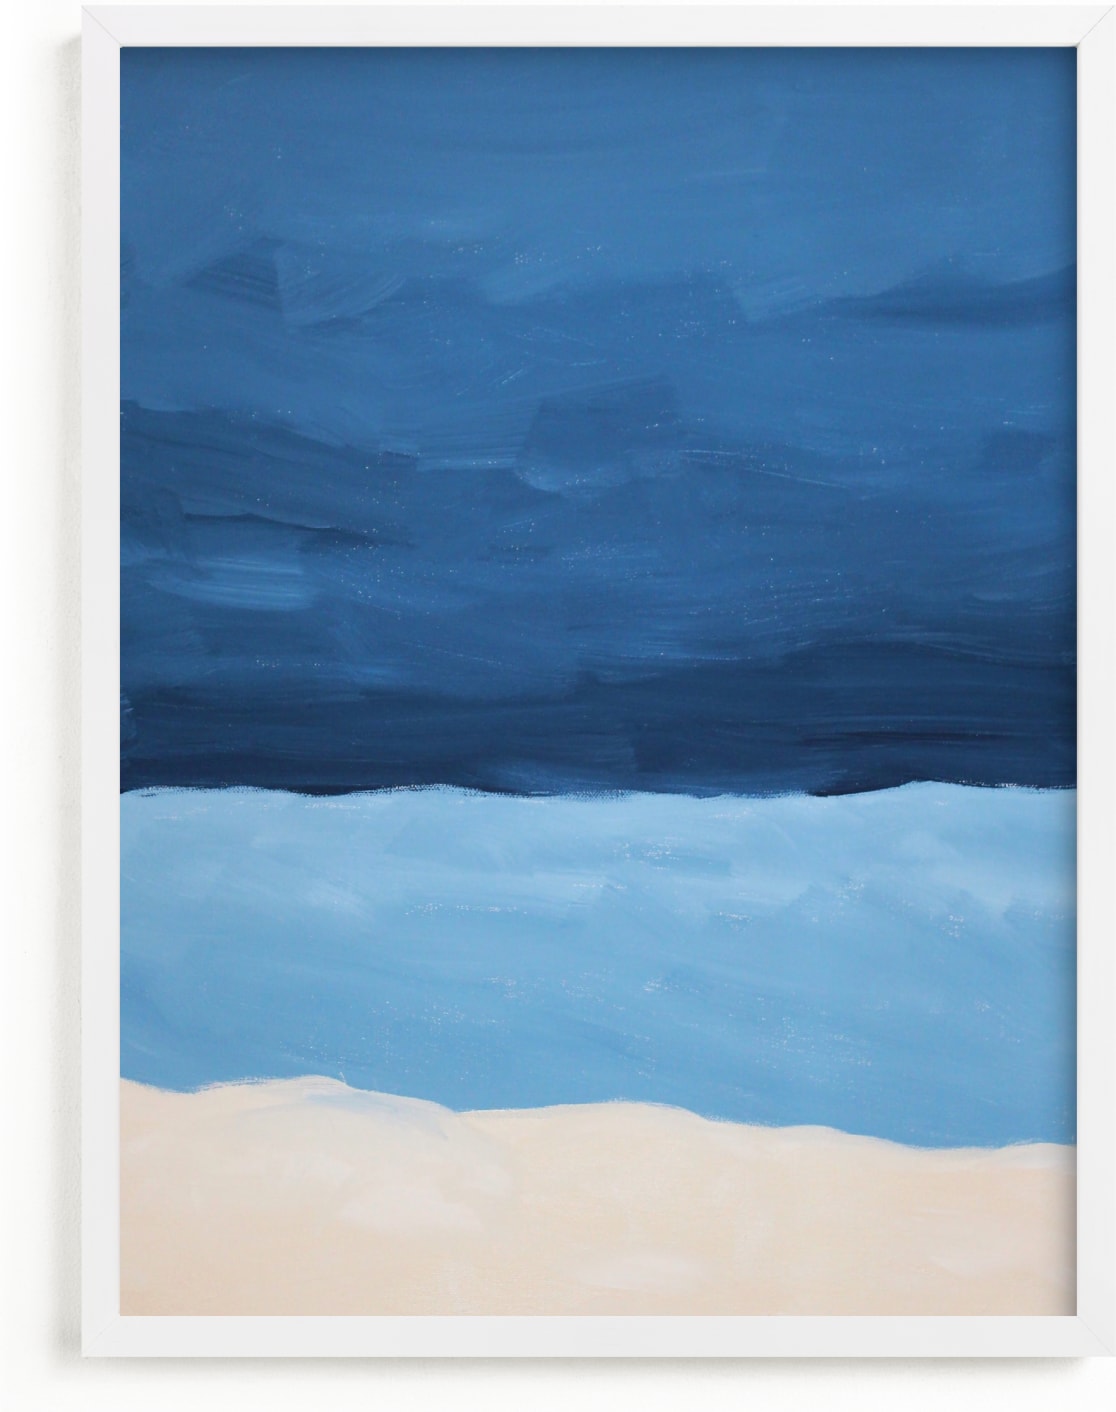 This is a blue art by Colleen Ehrlich called Blue Horizon.